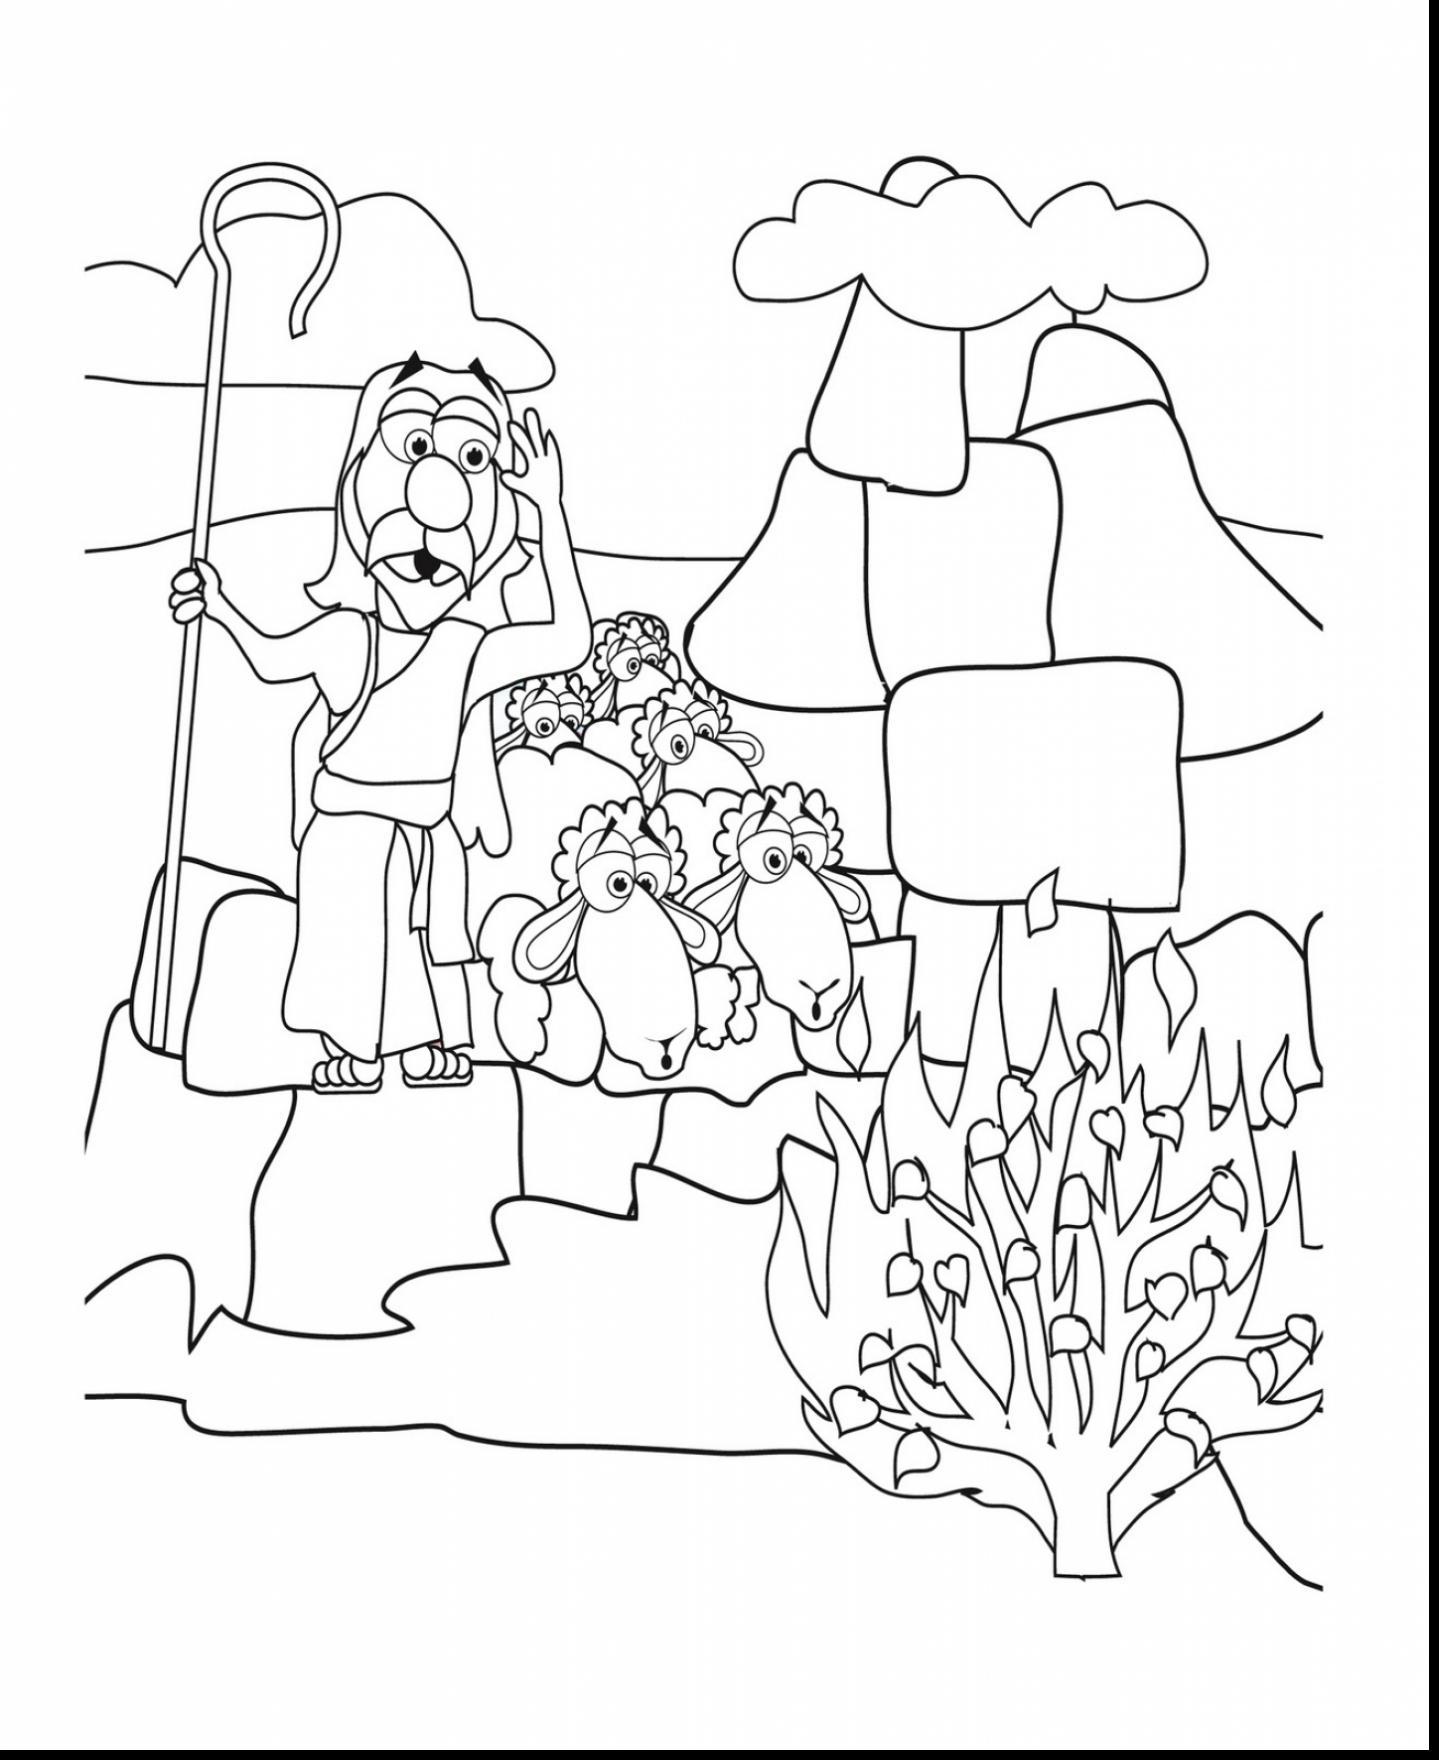 Moses And Pharaoh Coloring Pages at GetColorings.com | Free printable ...